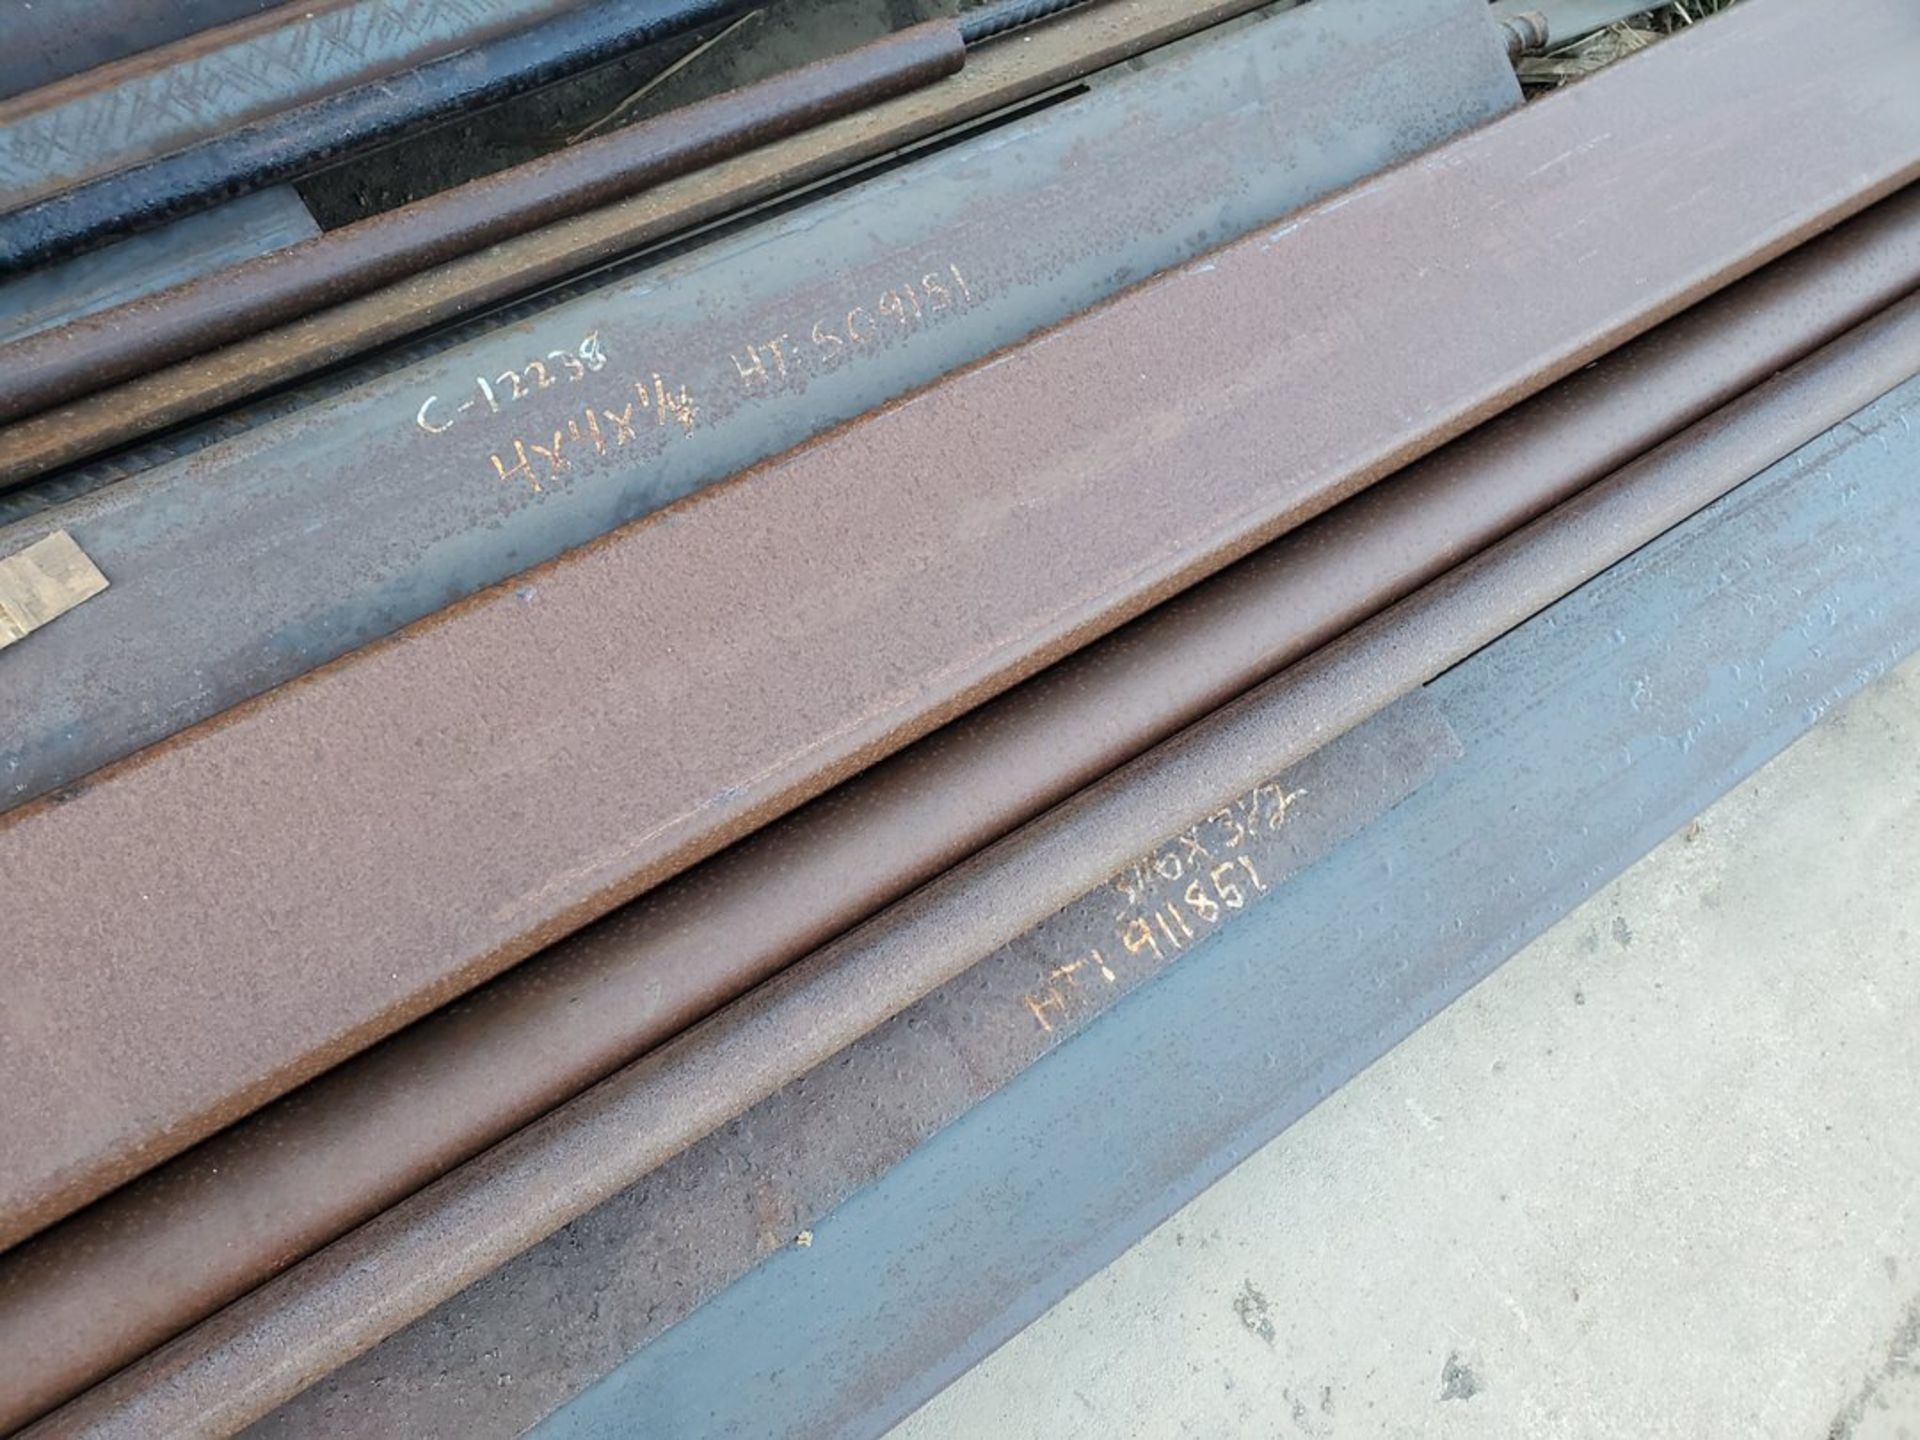 Assorted S/S Raw Matl. To Include But Not Limited To: Rebar, Pipe, Flat Bar, Angle, Sq. Tubing, Up - Image 11 of 14